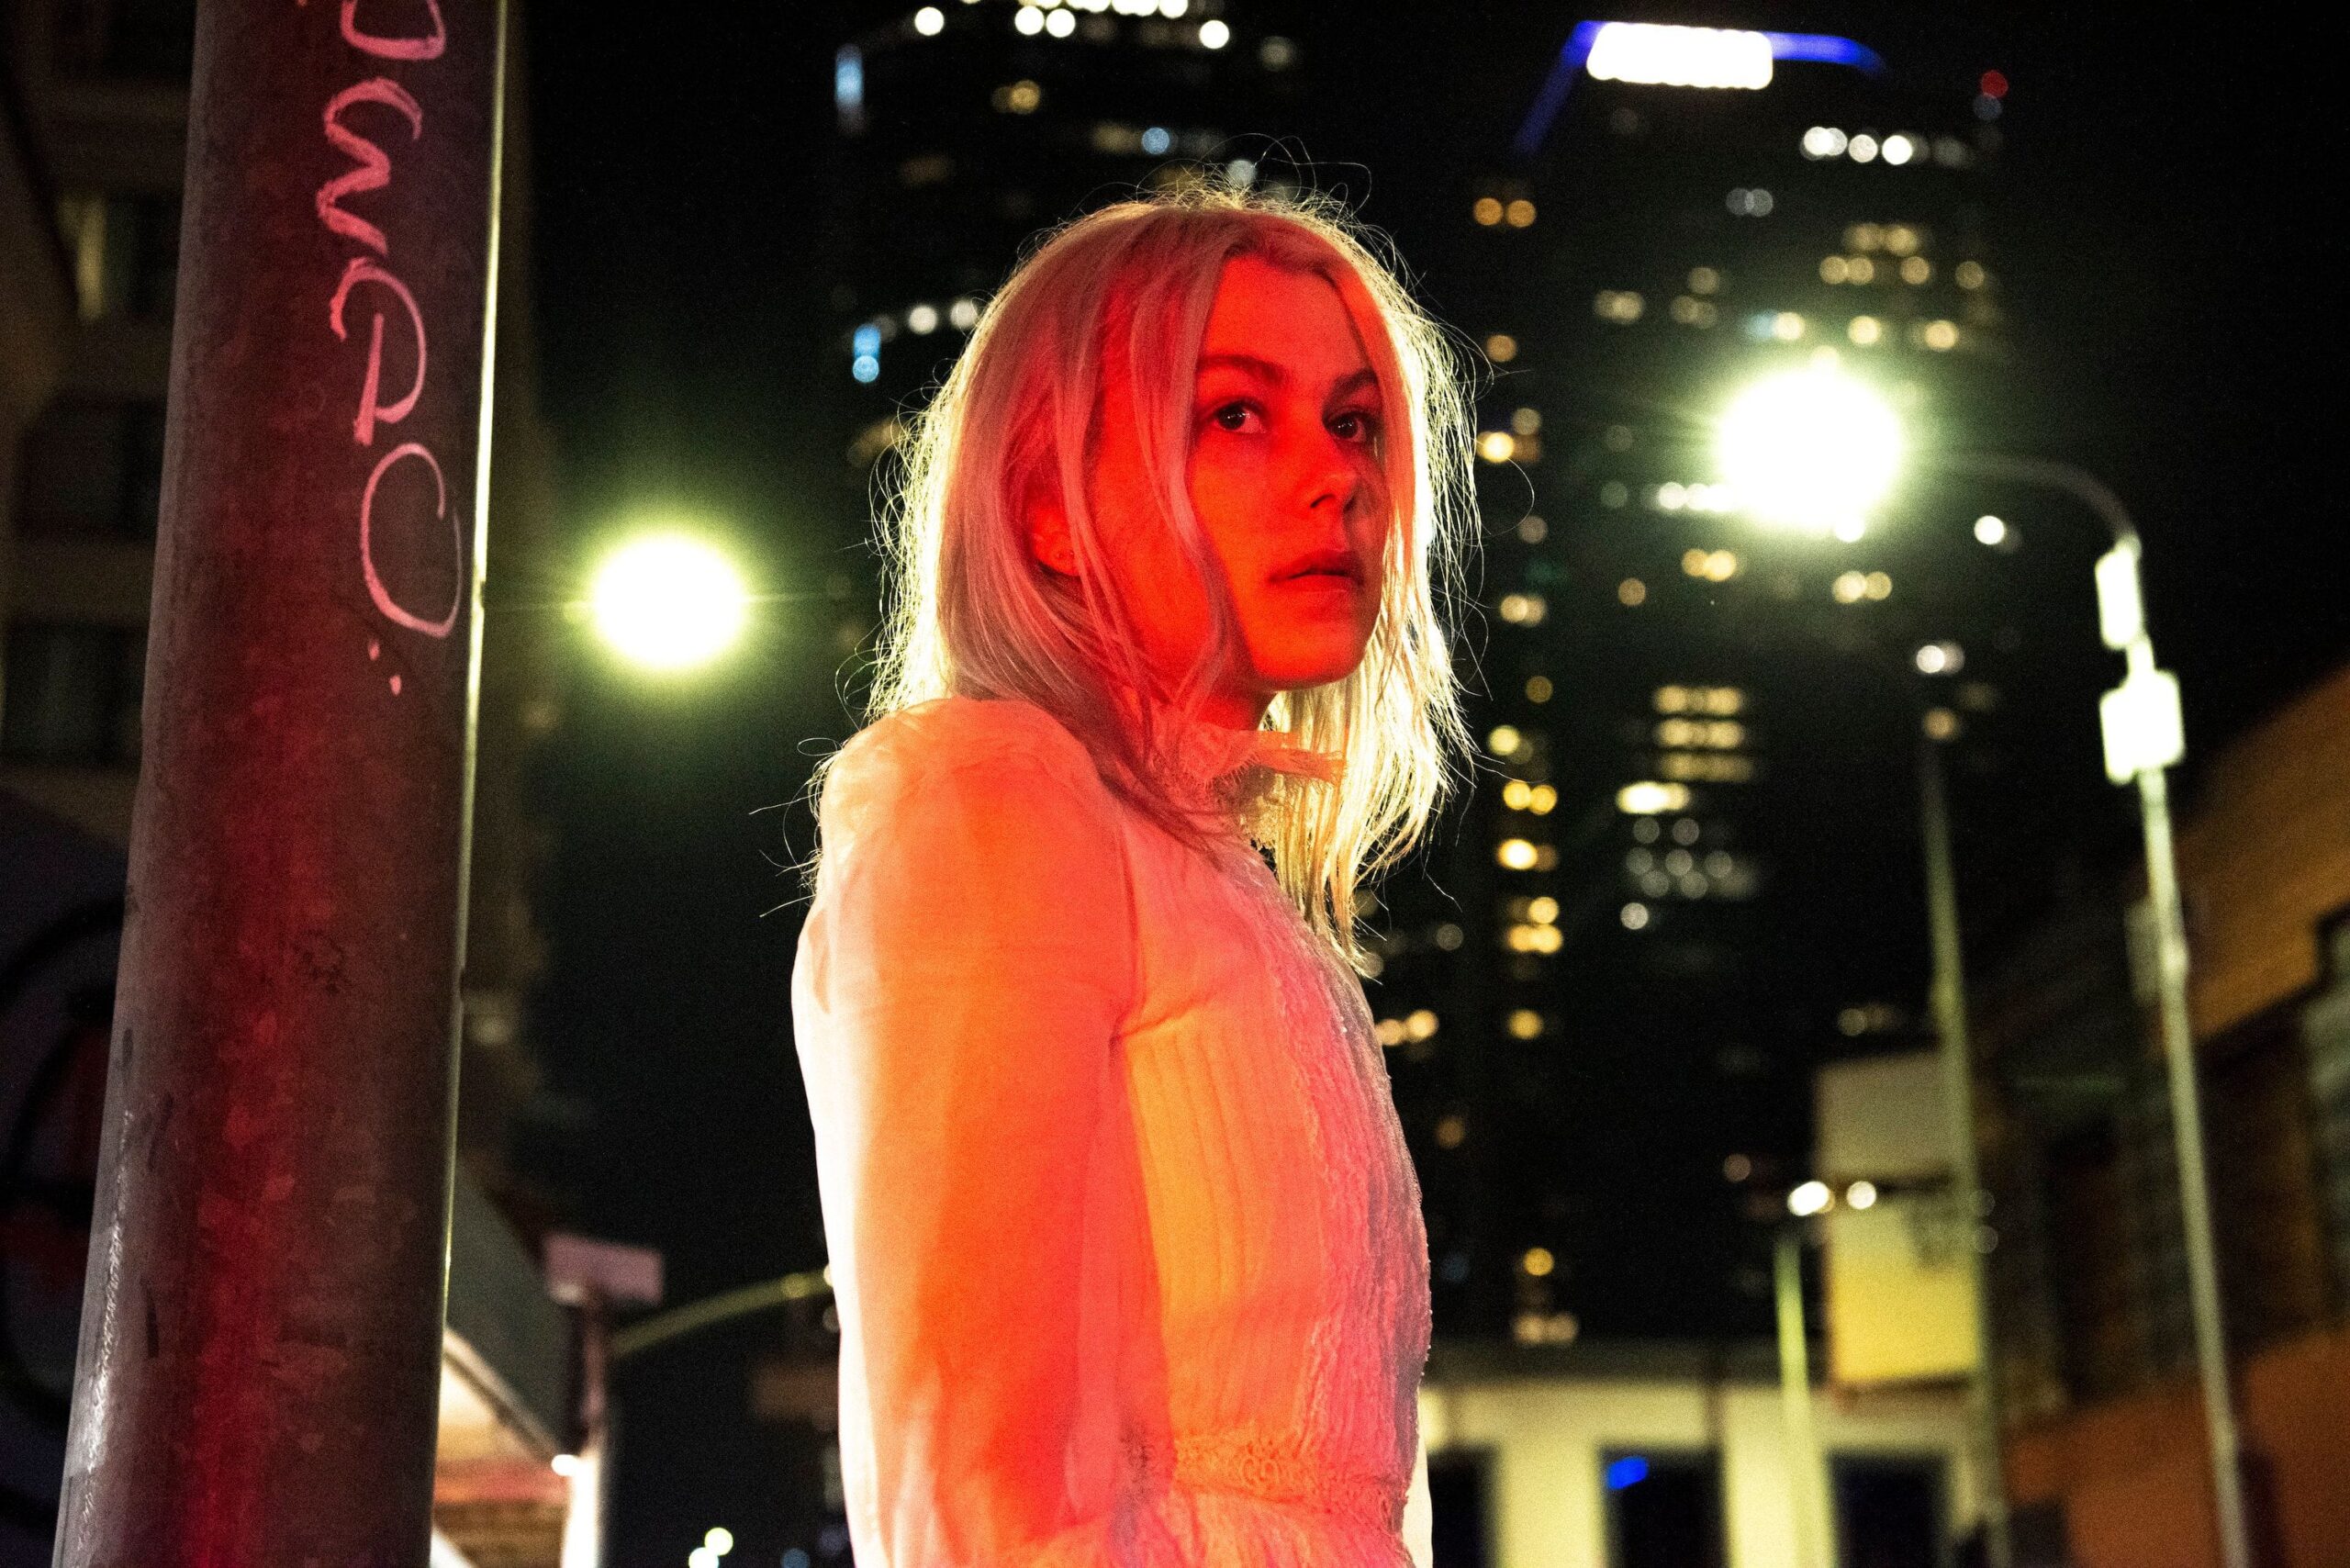 Phoebe Bridgers Sublimely Documents the Surreal Present on ‘Punisher’